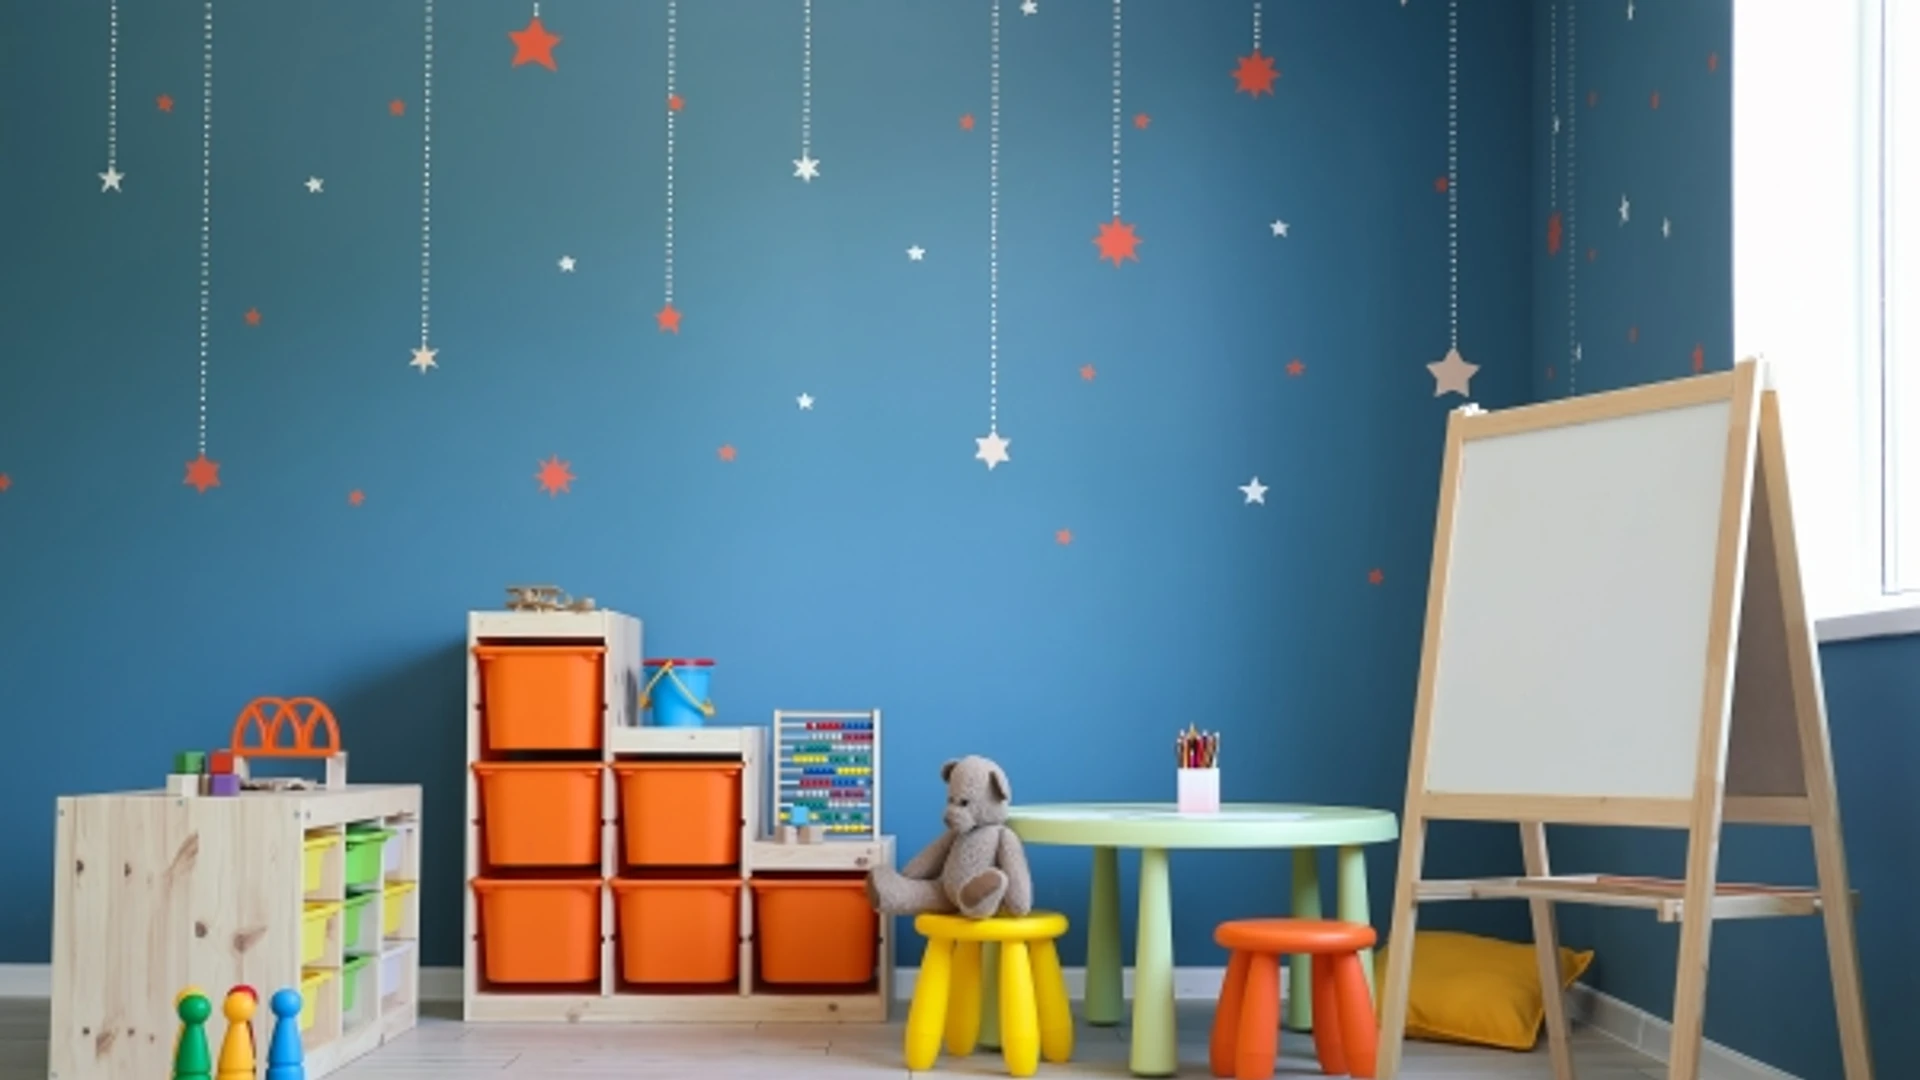 Modern playroom with toys and white easel. Stars hanging from the ceiling.